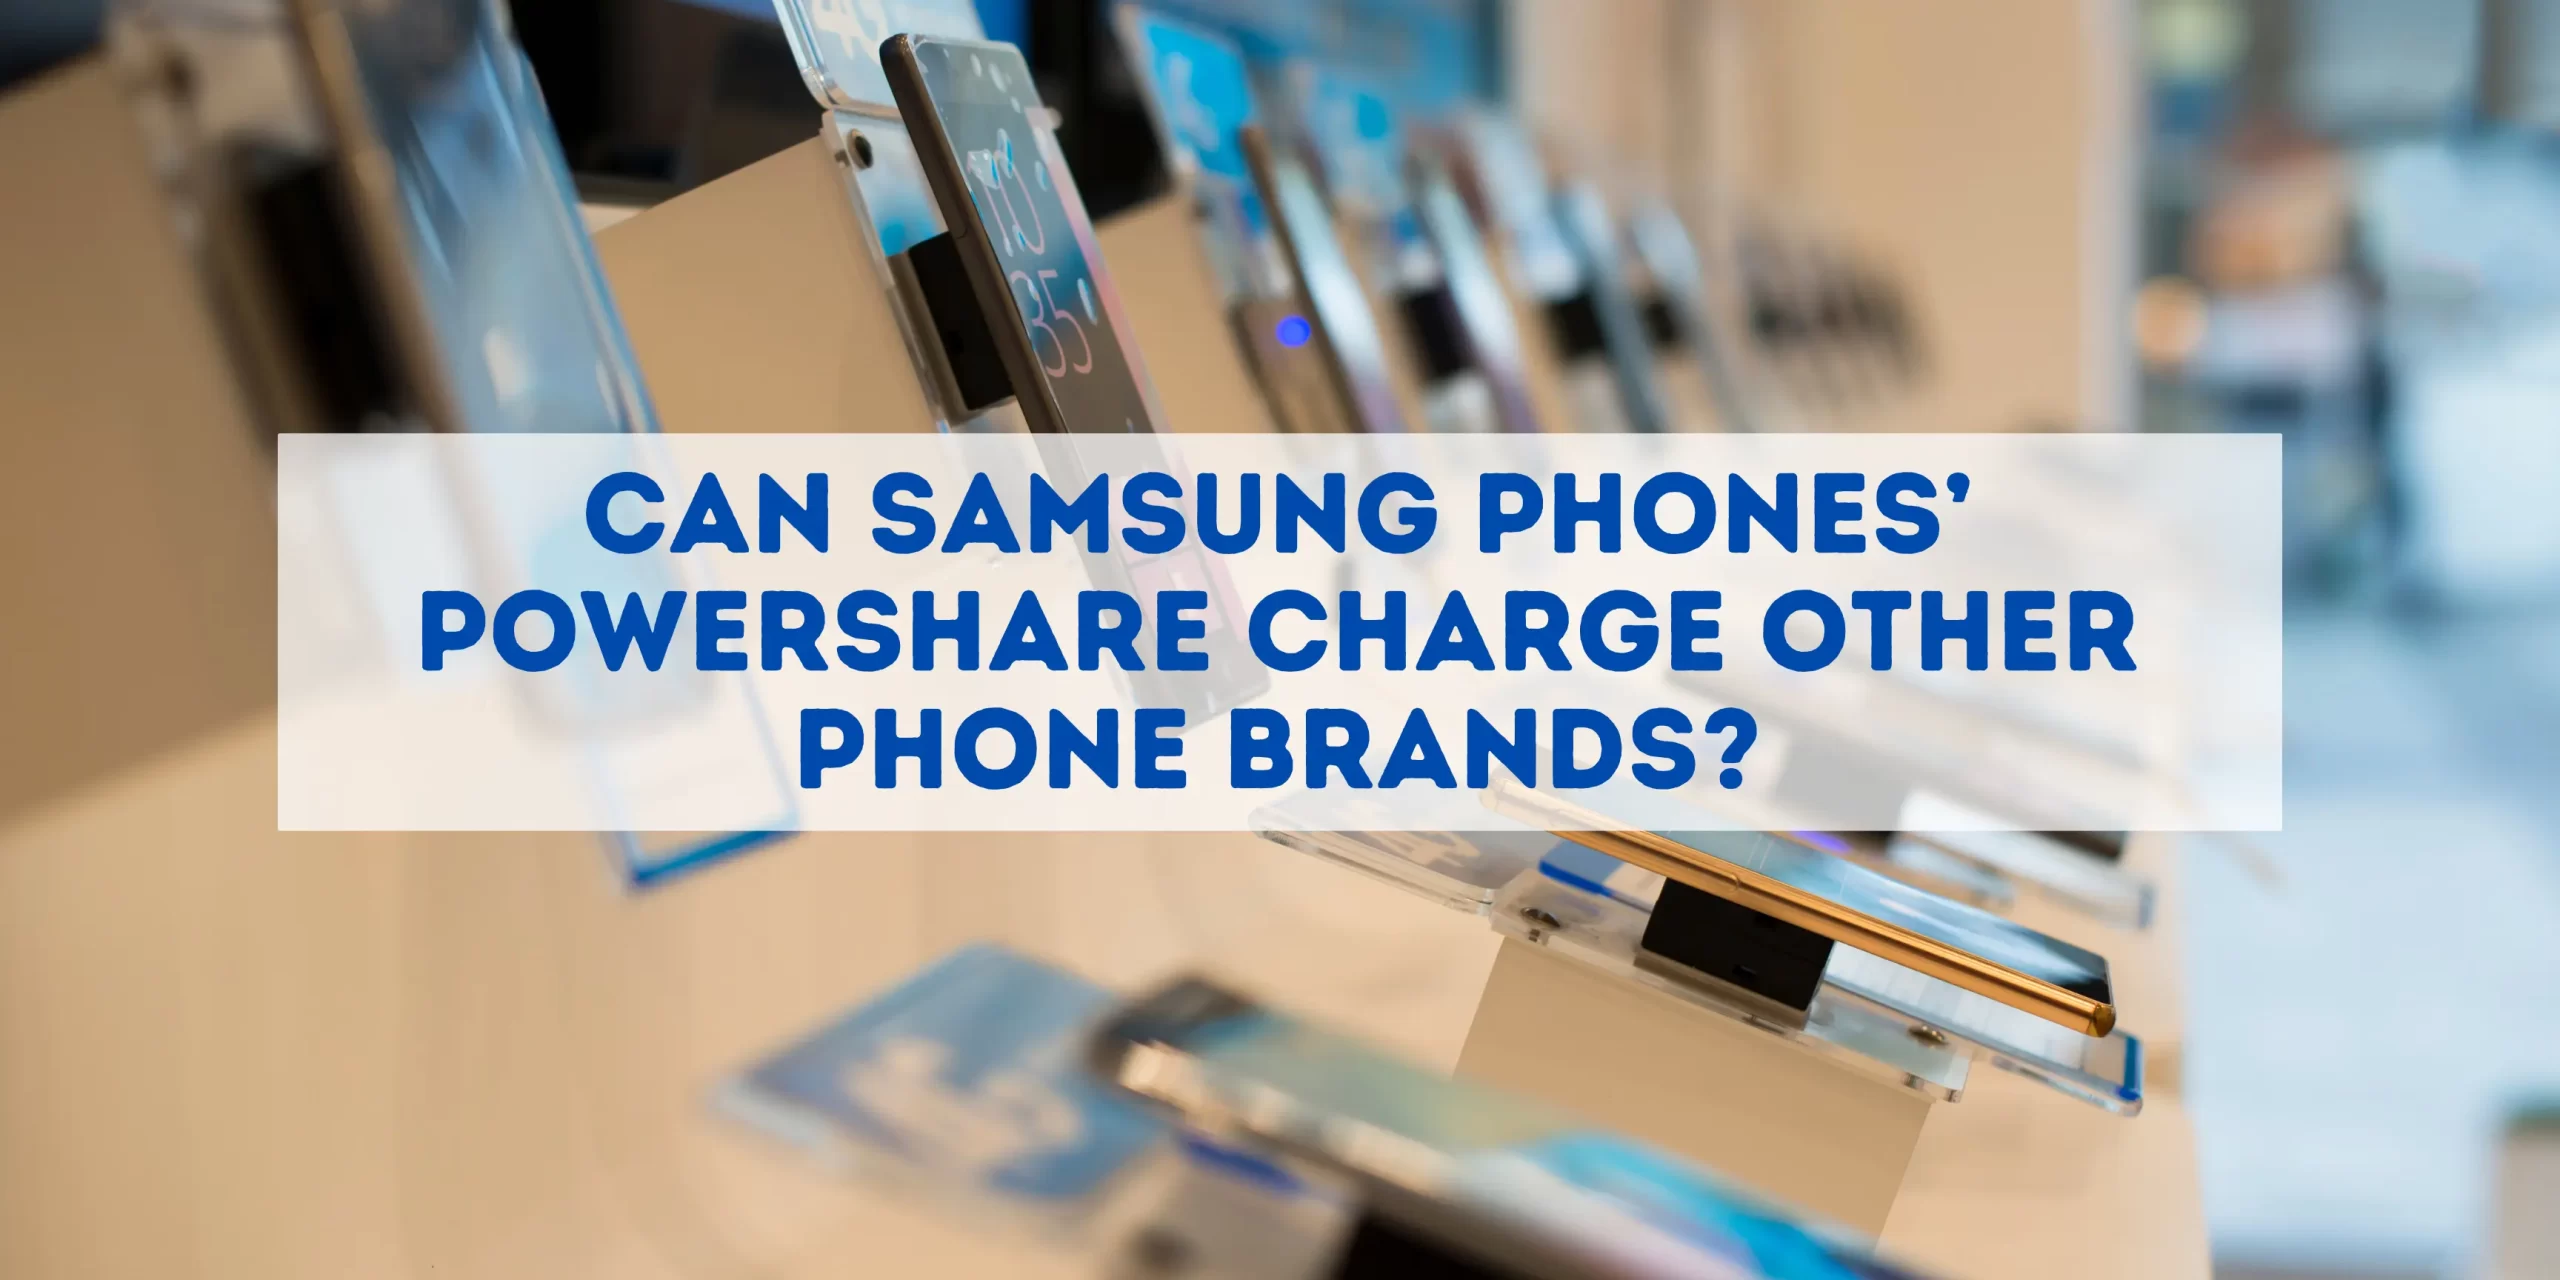 Samsung Phones PowerShare Charge Other Phone Brands